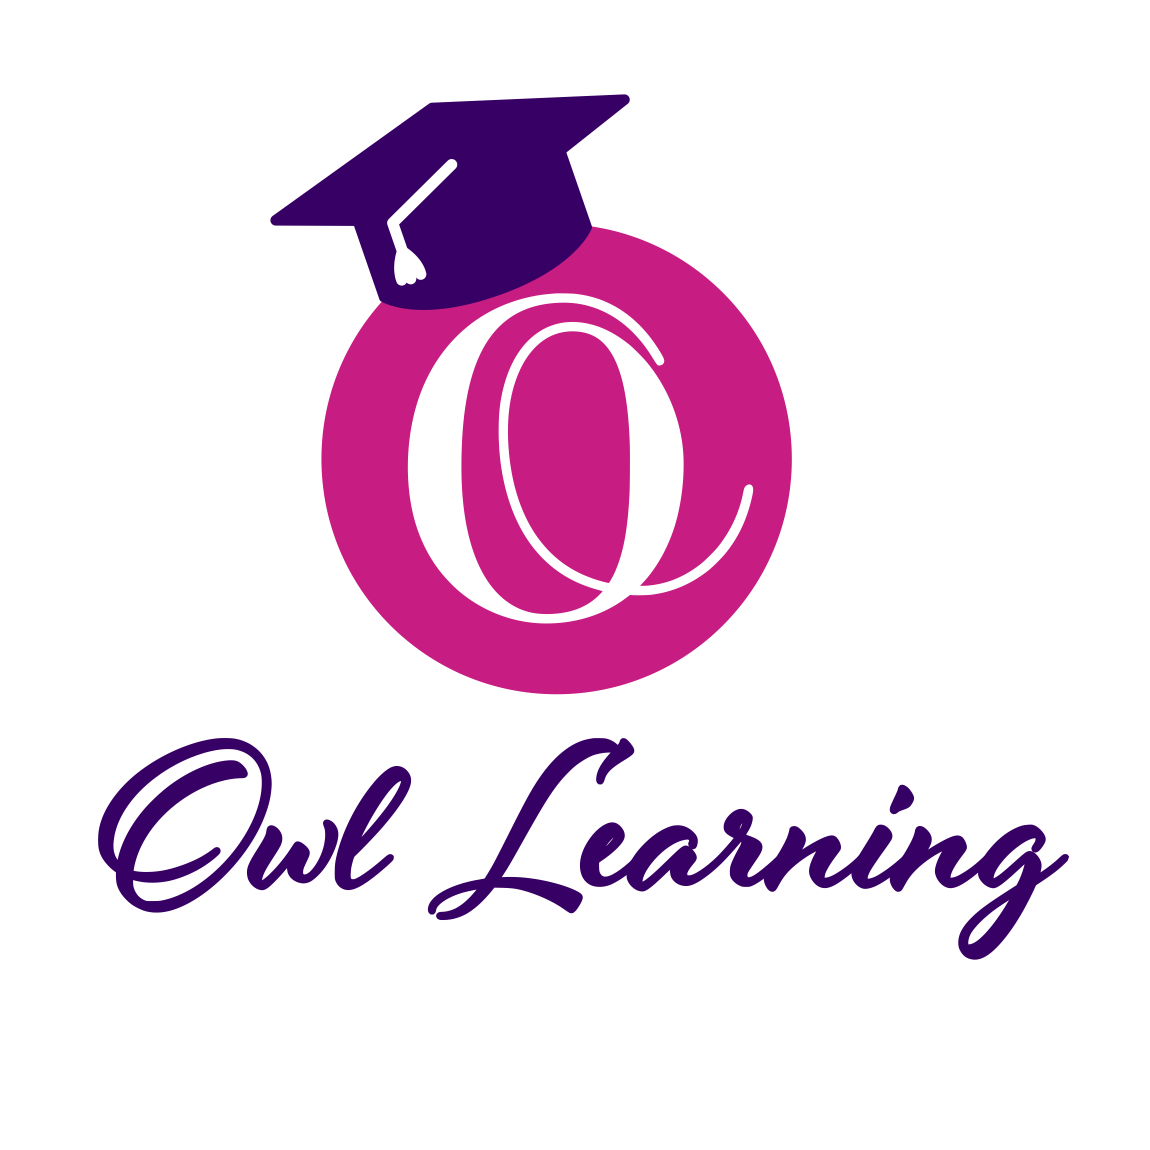 The logo or business face of "Owl Learning"